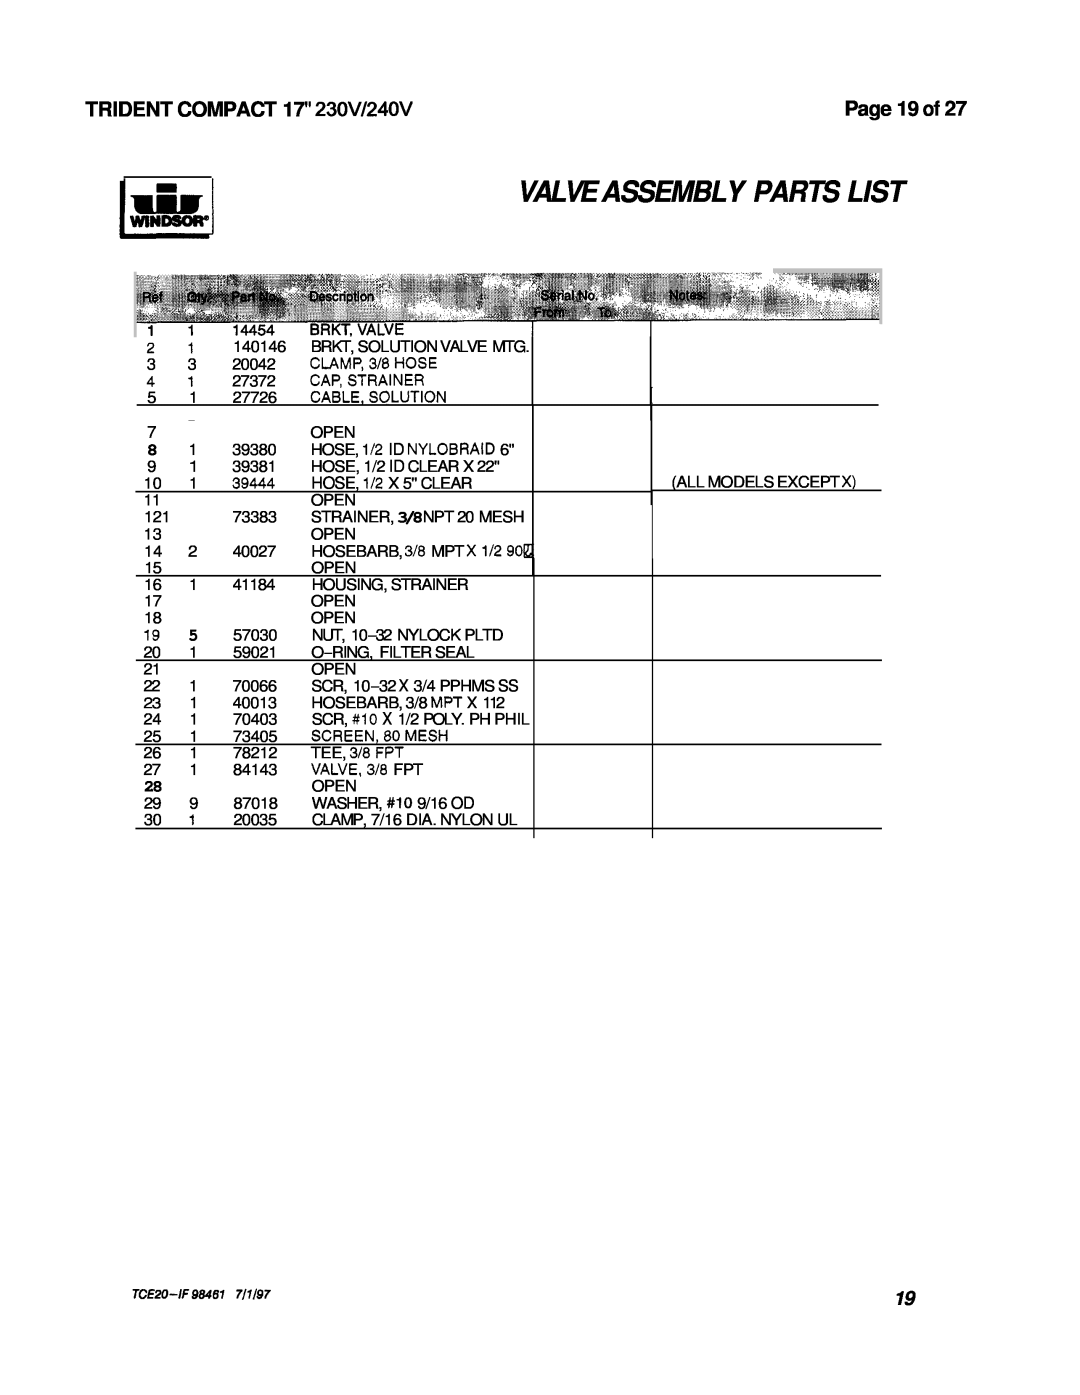 Windsor operating instructions Valve Assembly Parts List, Page 19 of, TRIDENT COMPACT 17 230V/240V 